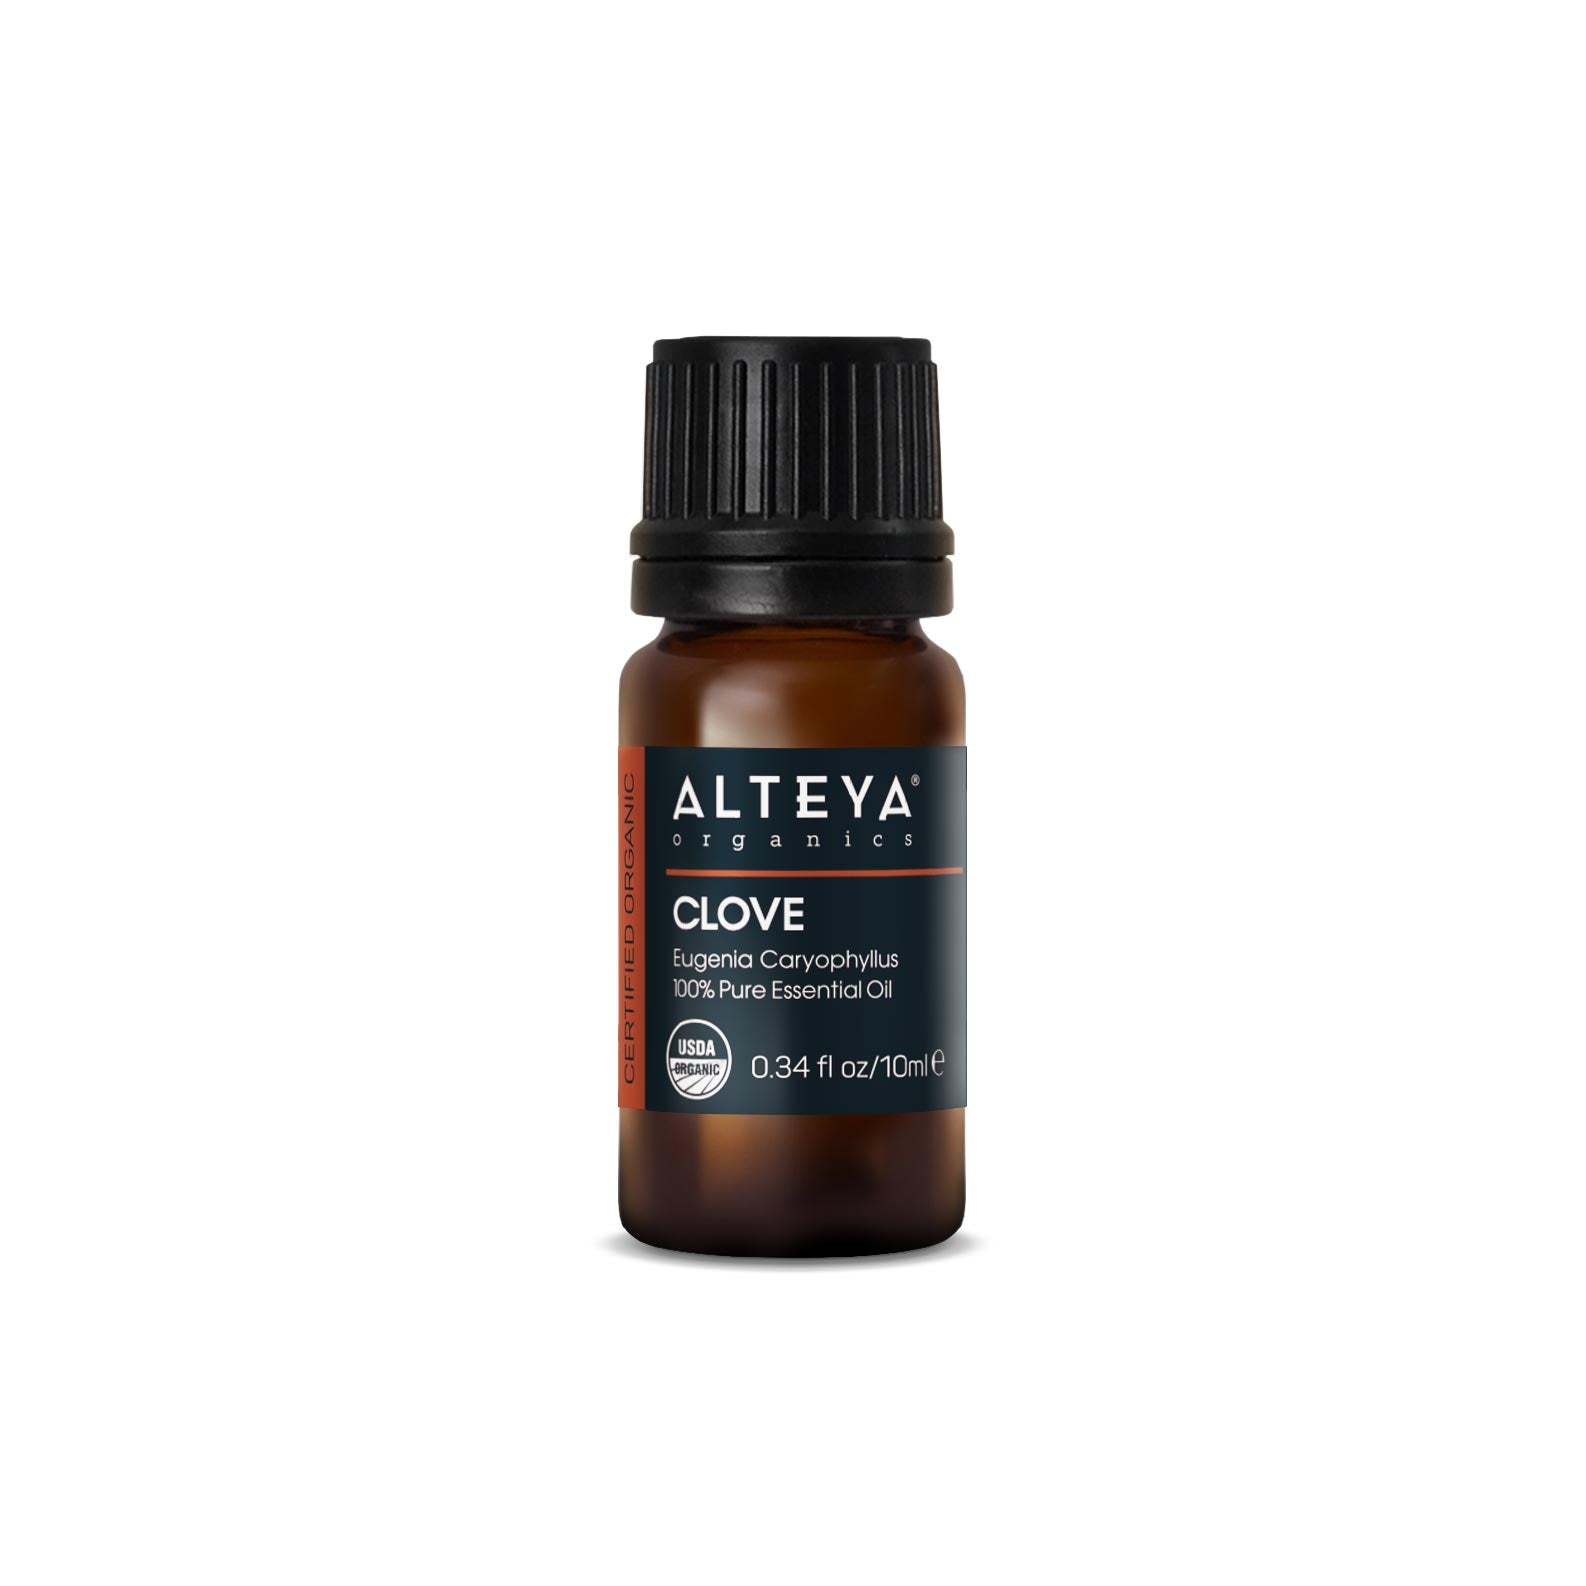 A bottle of clove essential oil (Syzygium Aromaticum) from Alteya Organics on a white background with antimicrobial properties.